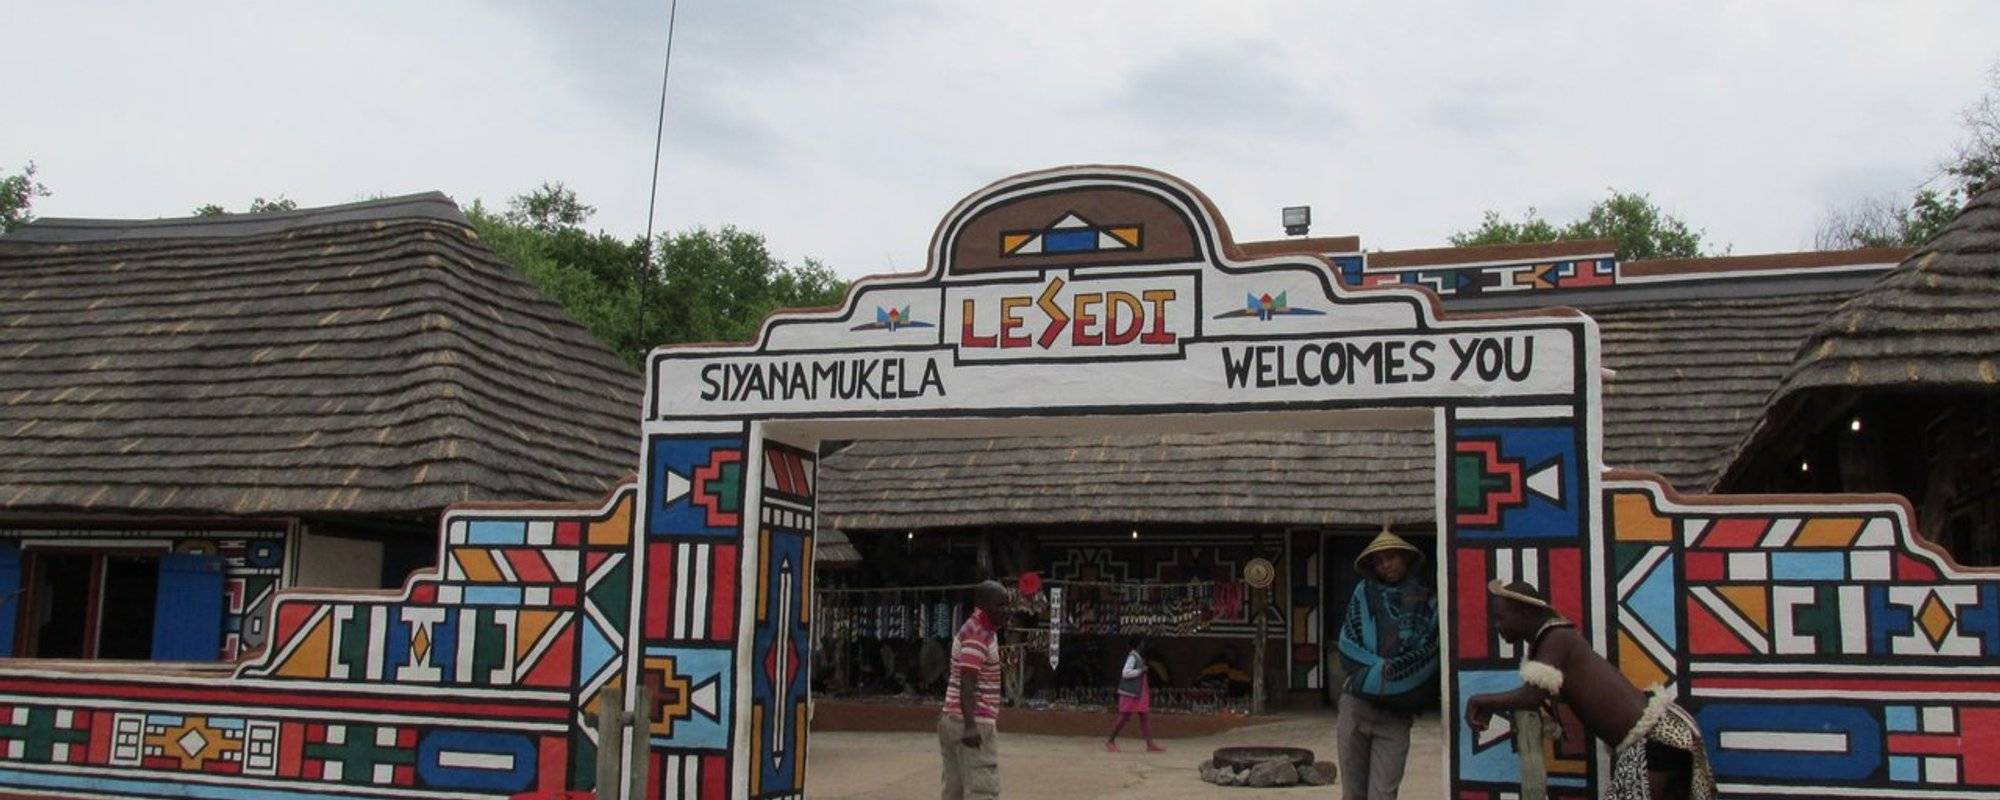 #Travel Diary 13- The place I did not want to leave: "Lesedi Culturel Village" - South Africa